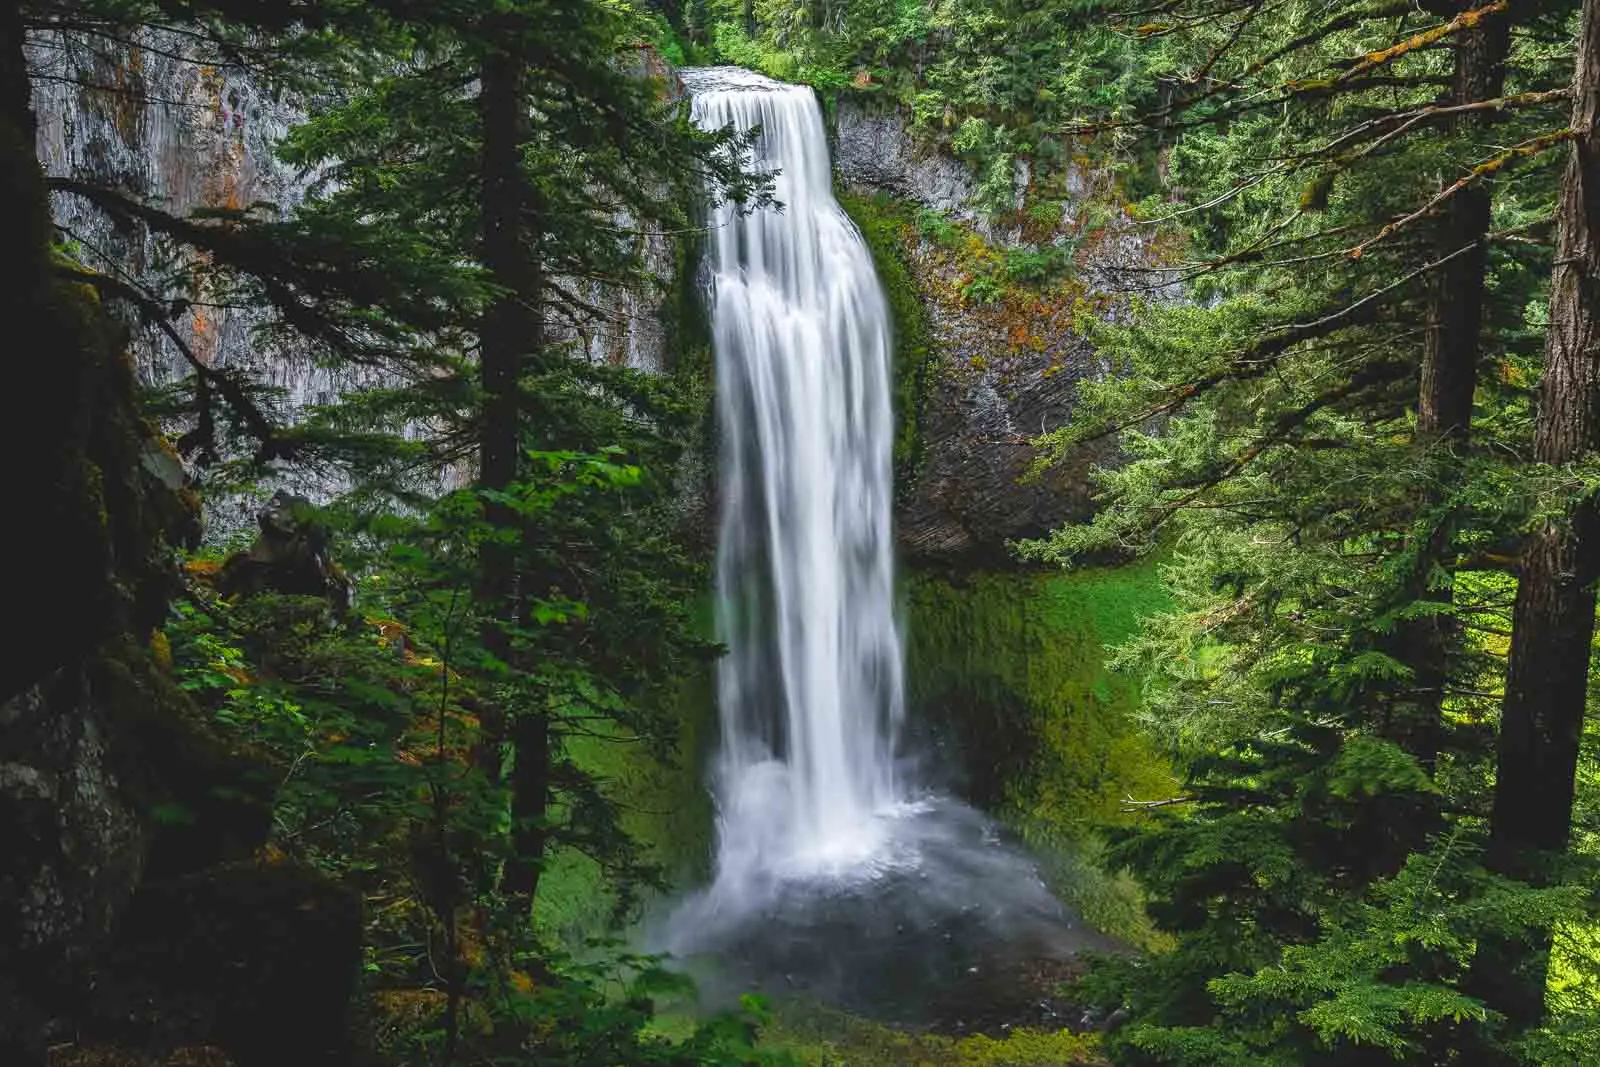 If you're looking for impressive waterfalls in Oregon, you won't be disappointed by Salt Creek Falls.